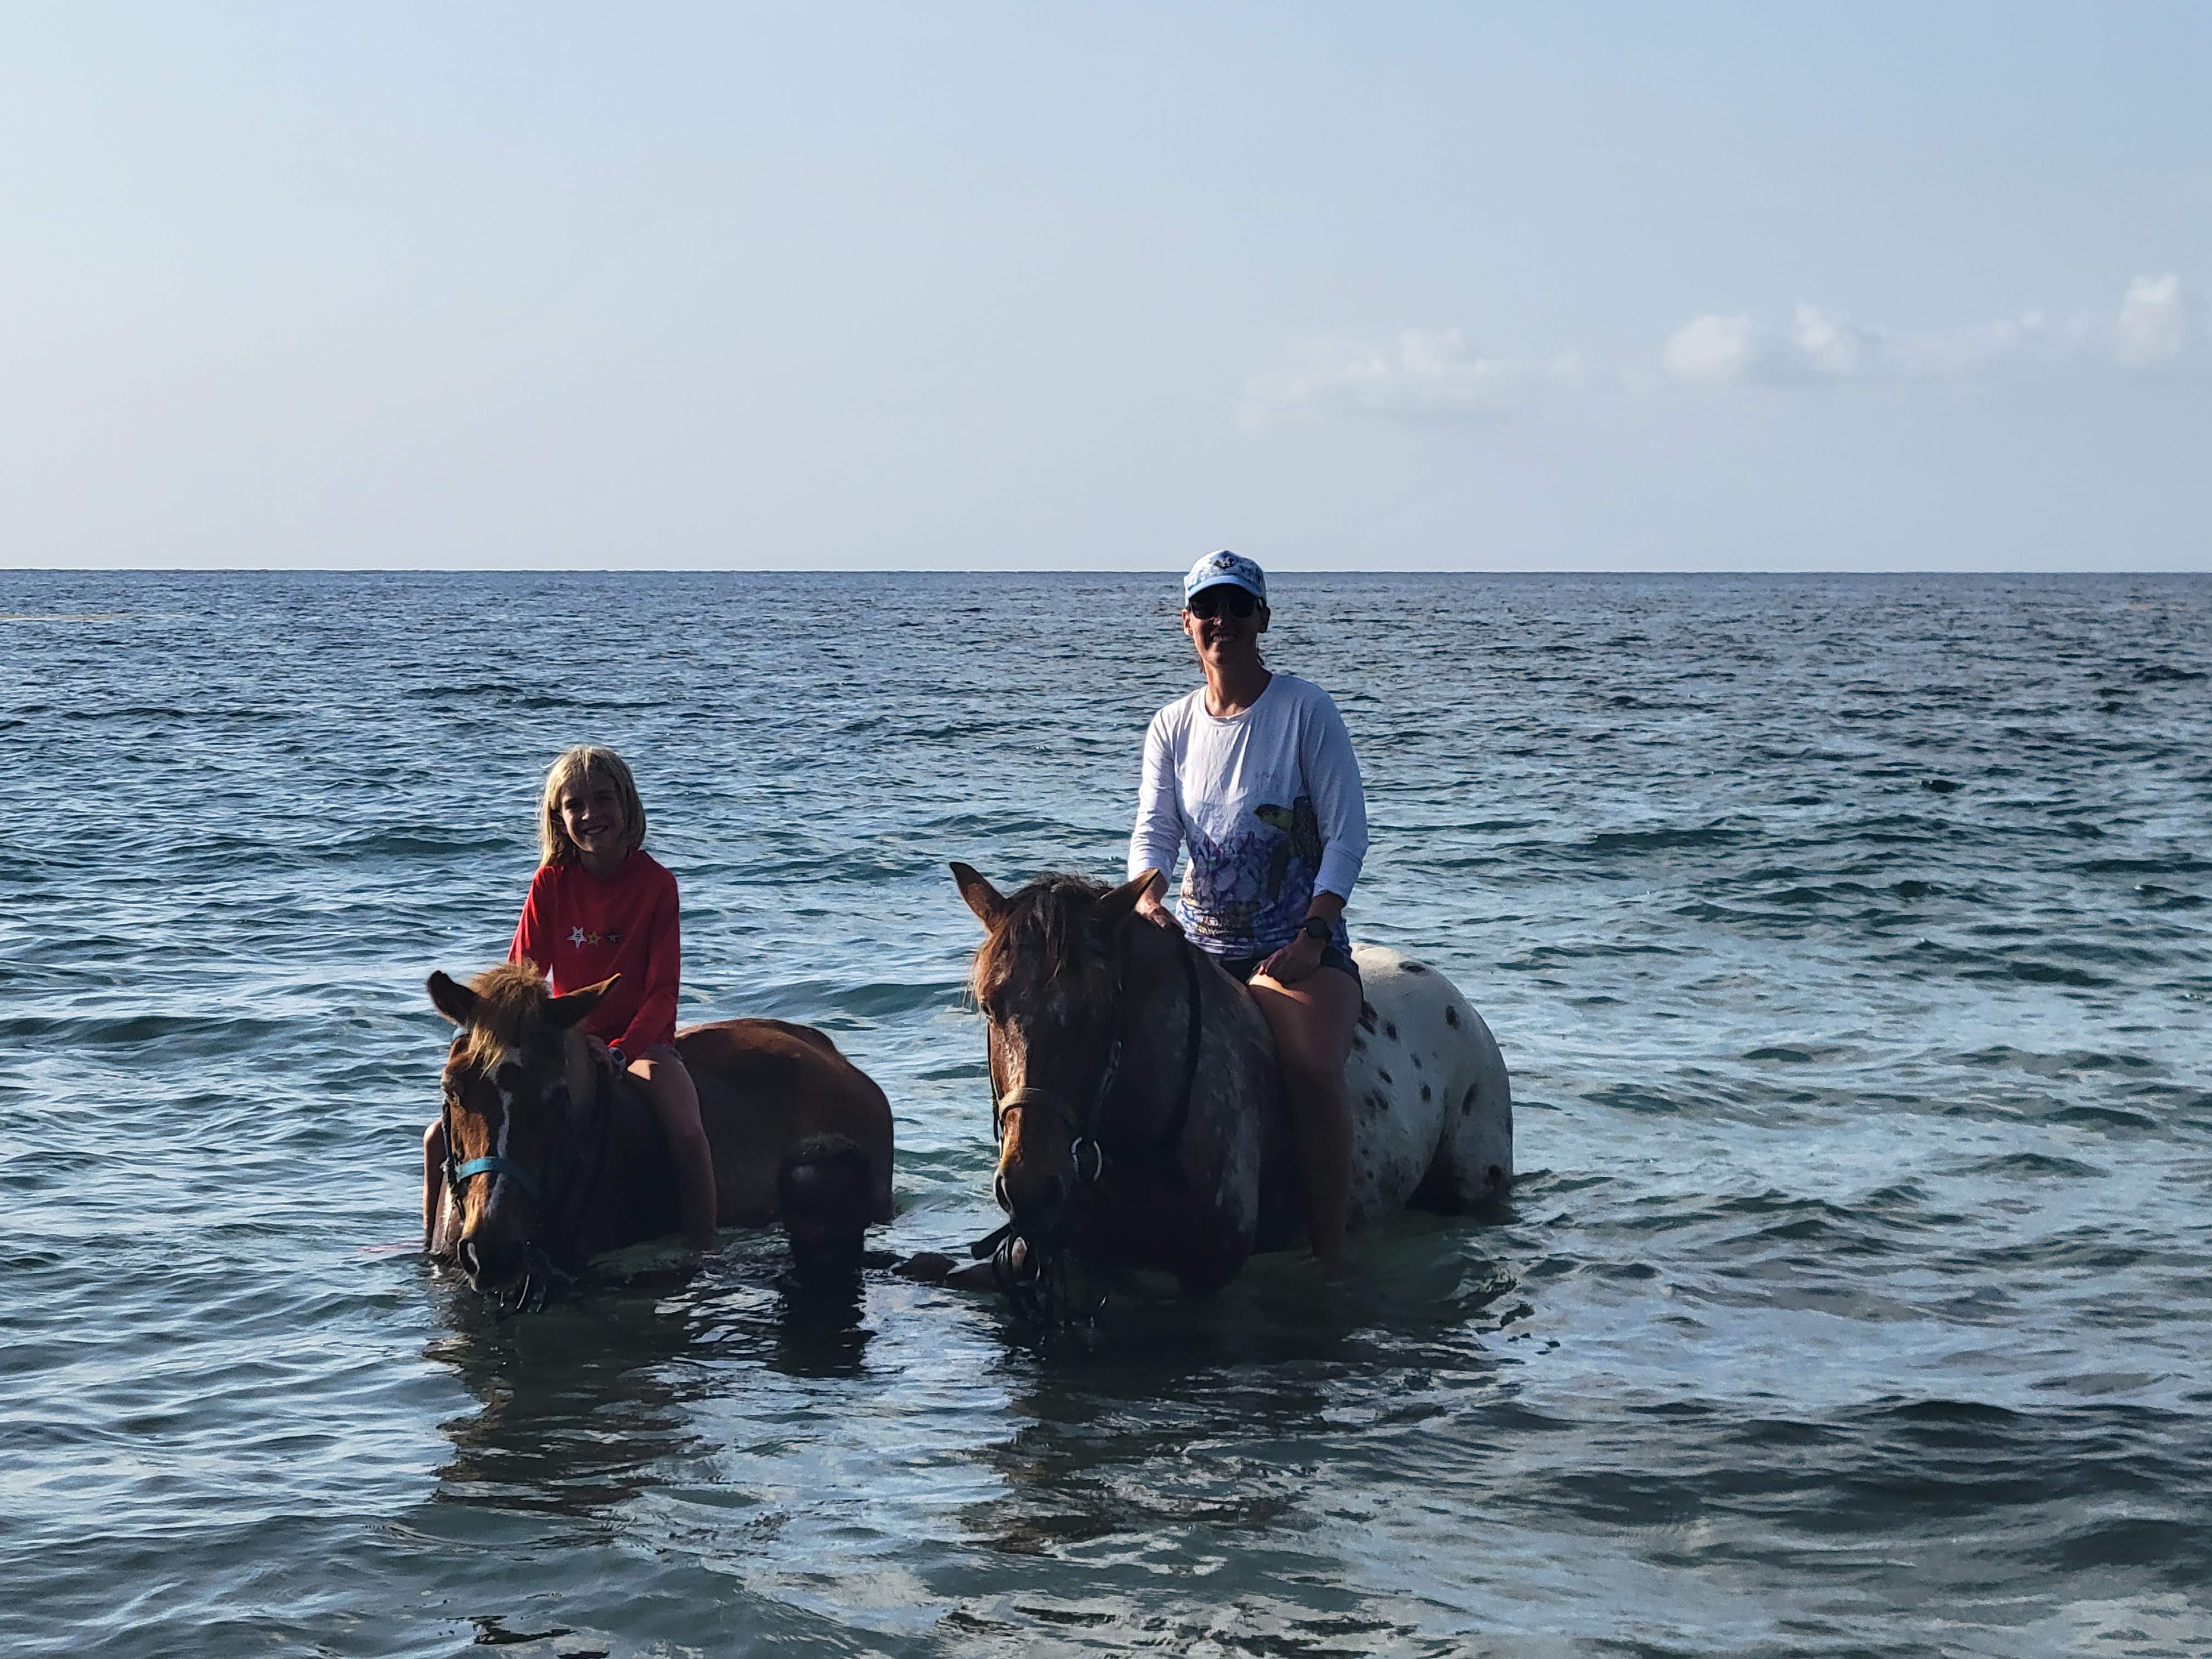 The Girls On Horses At The Beach